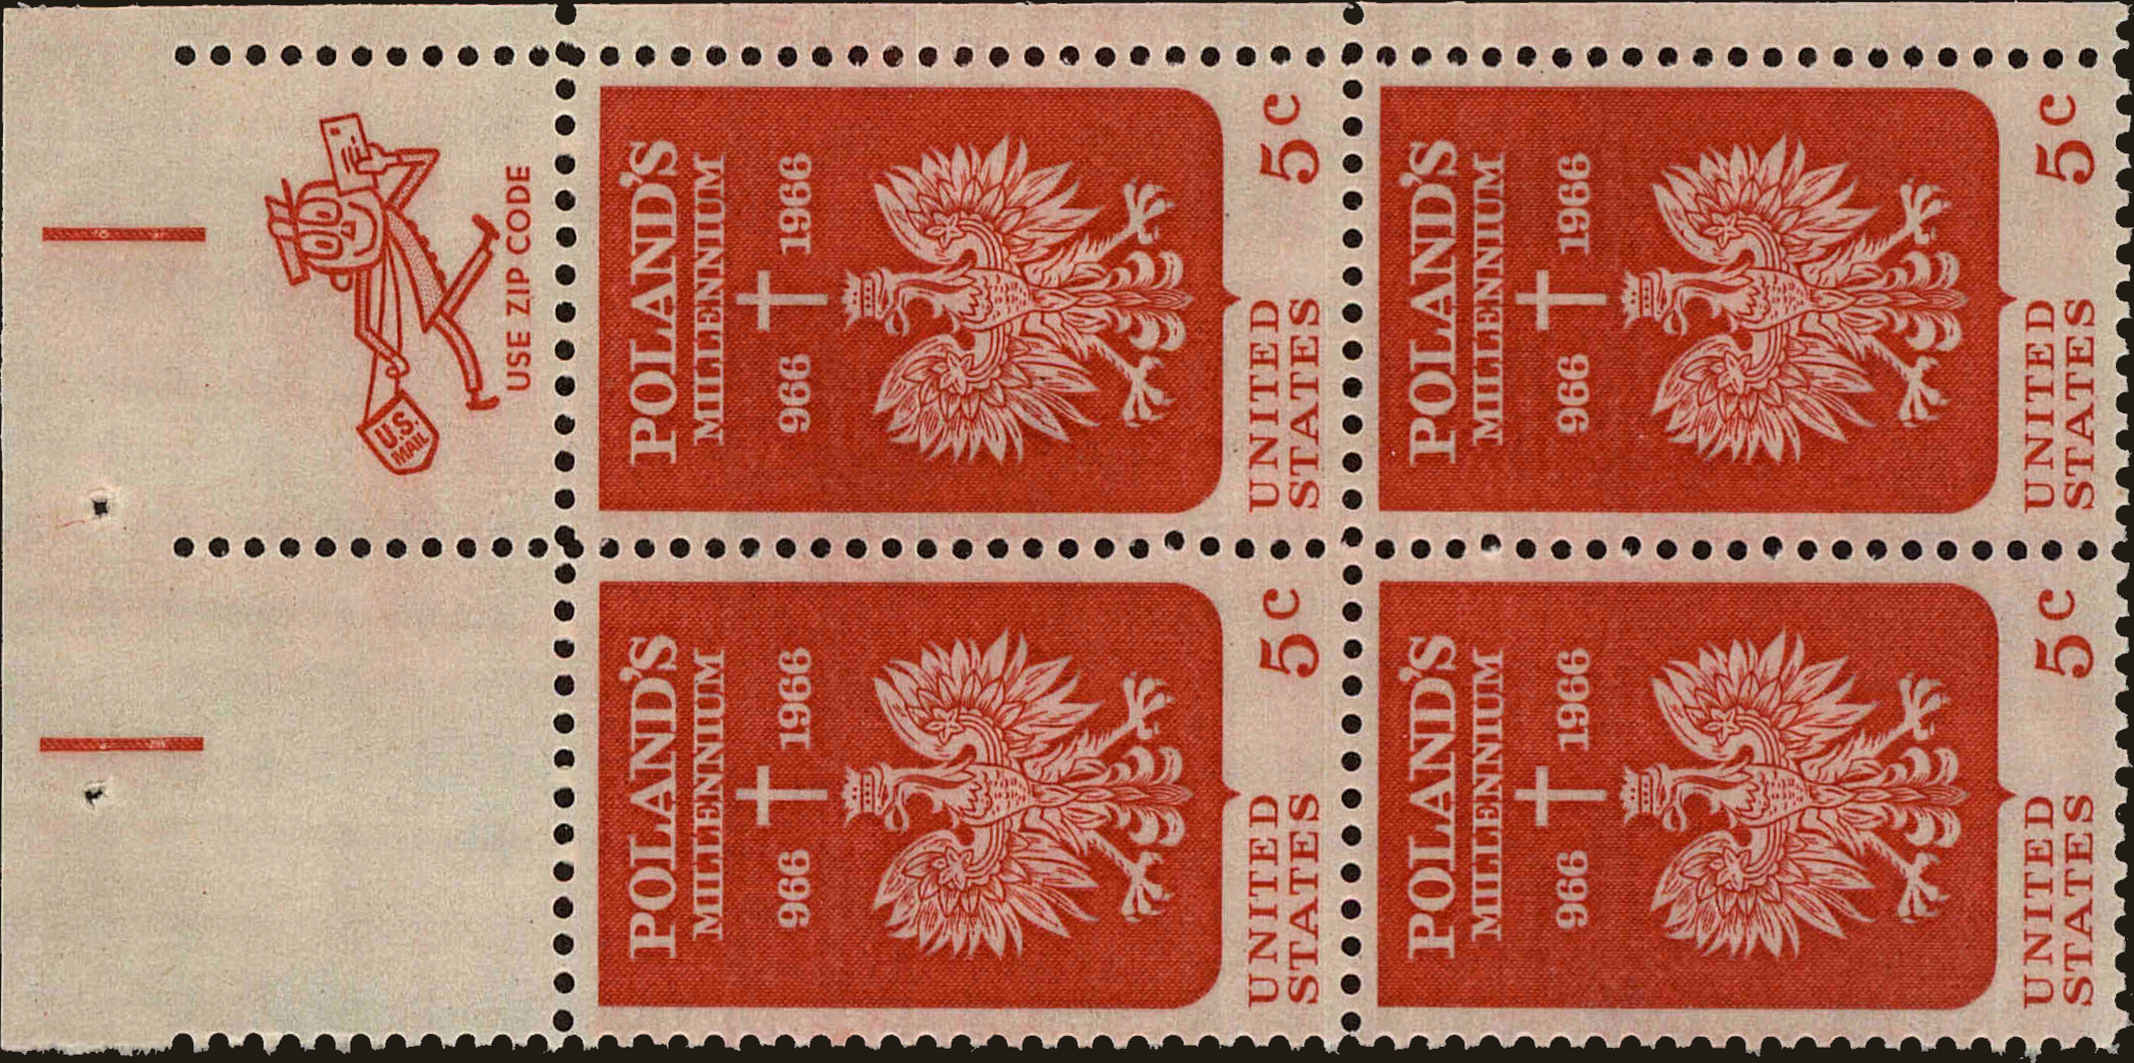 Front view of United States 1313 collectors stamp